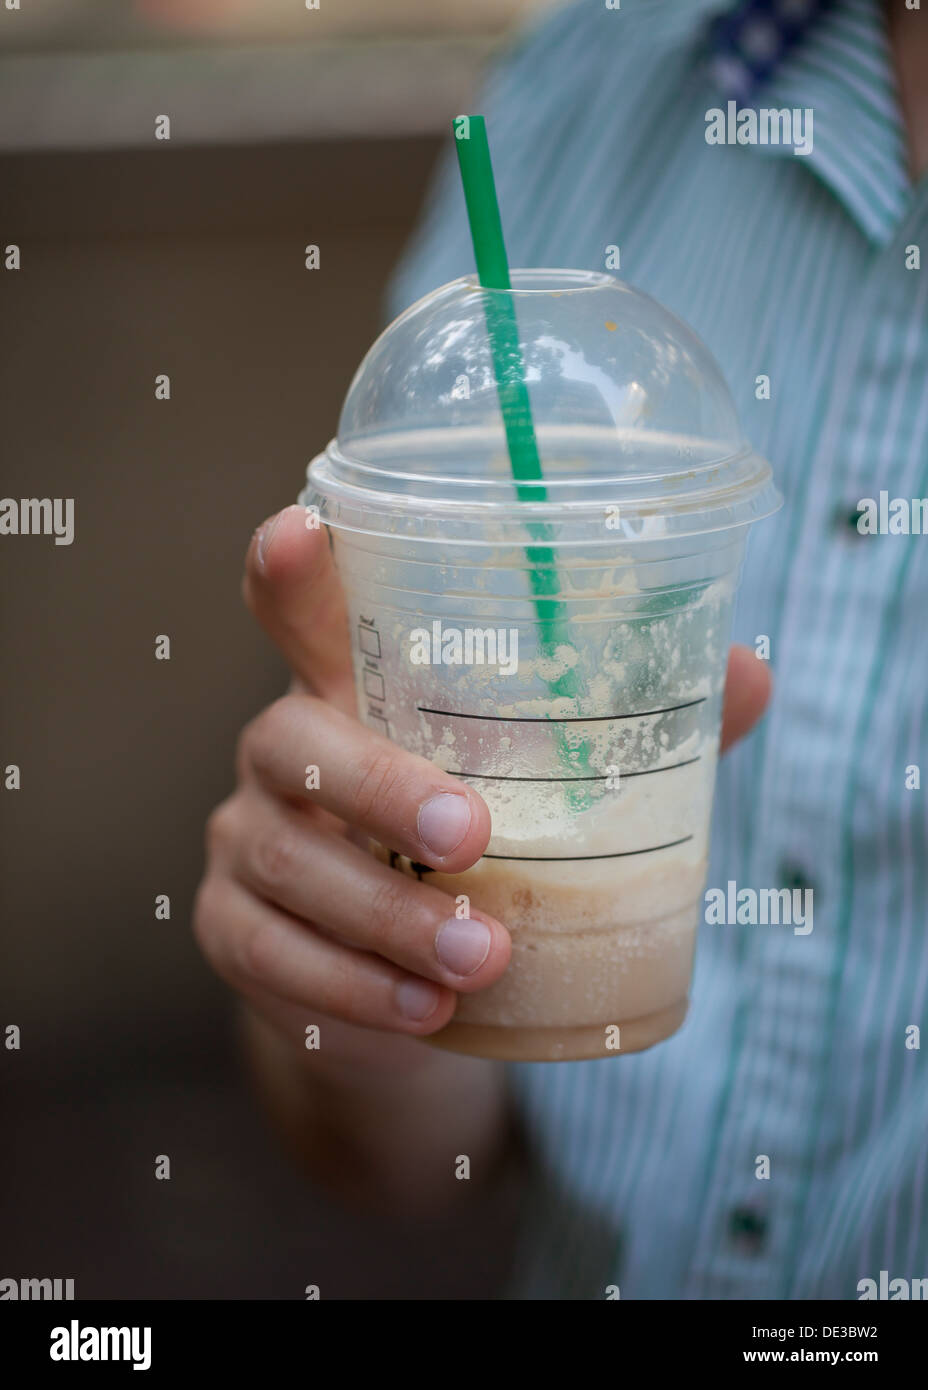 Man holding an iced coffee drink in hand Stock Photo